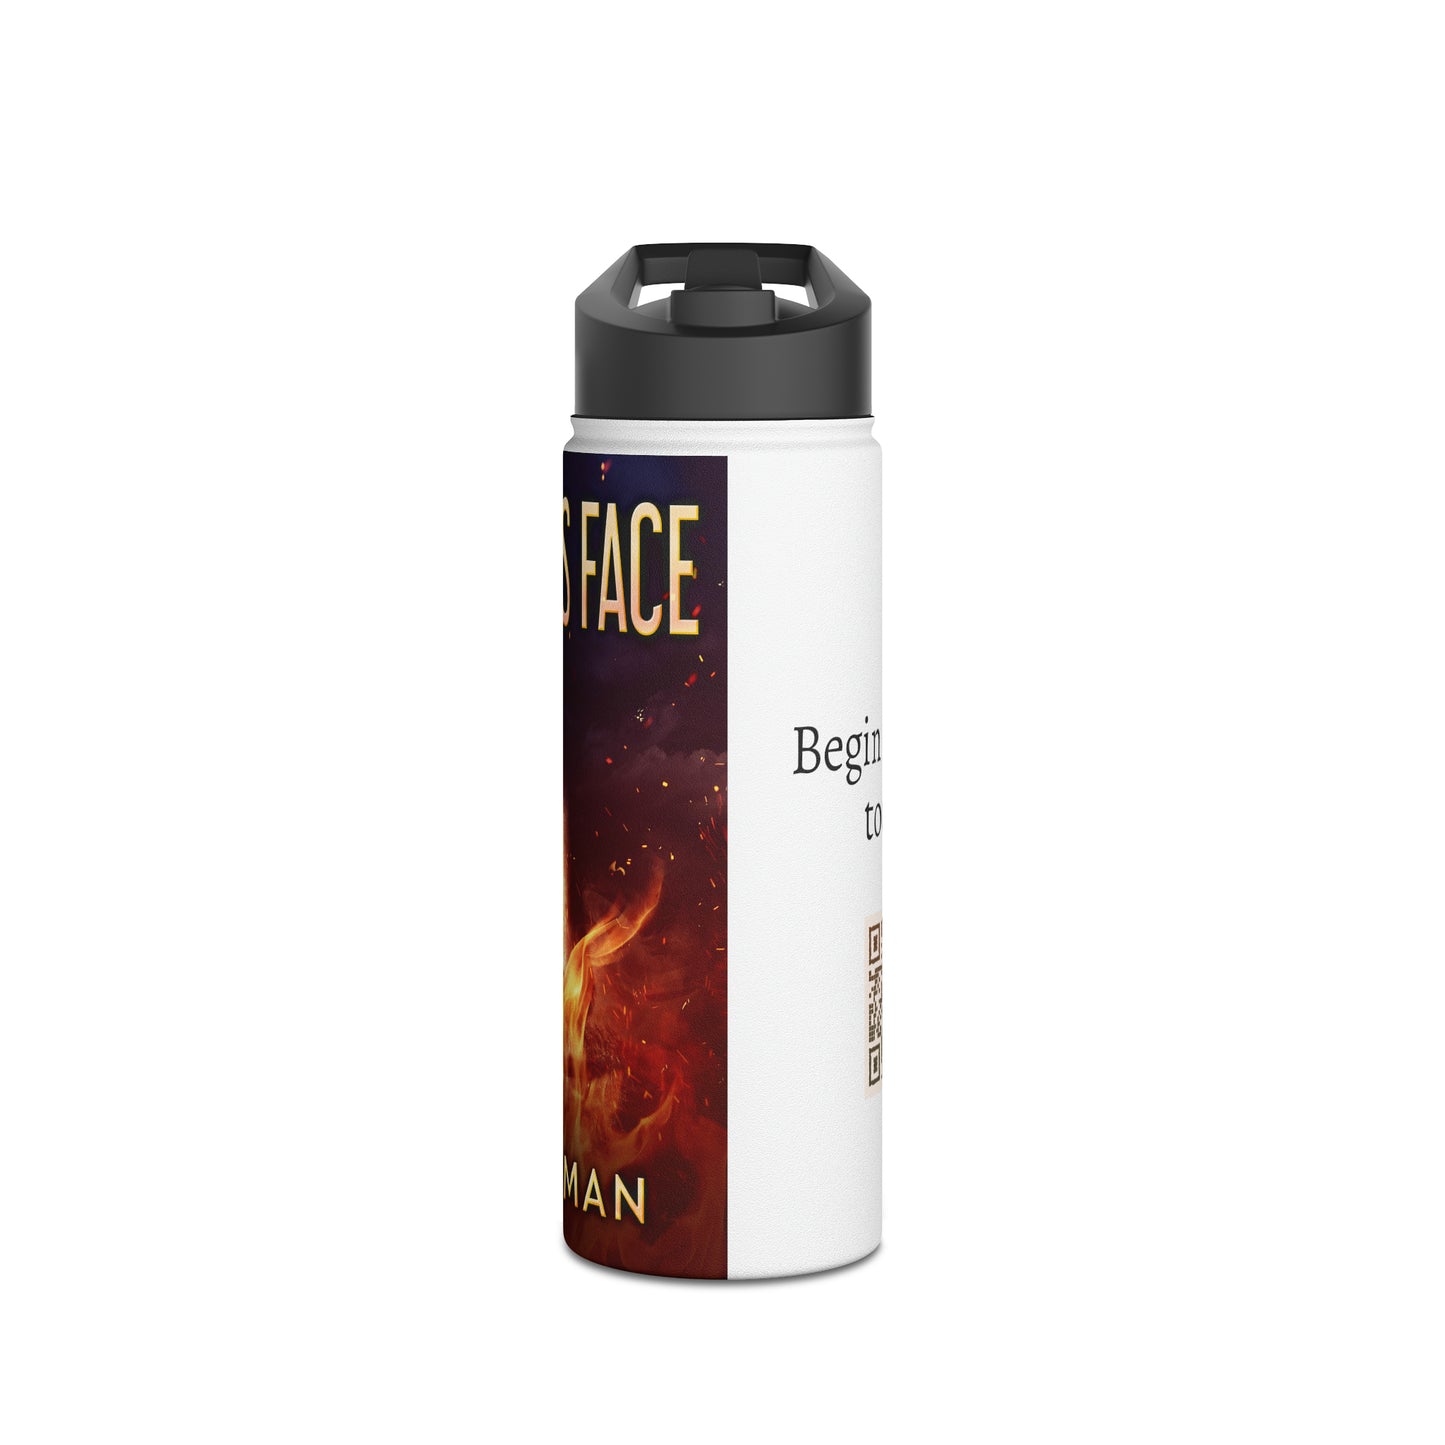 A Man's Face - Stainless Steel Water Bottle